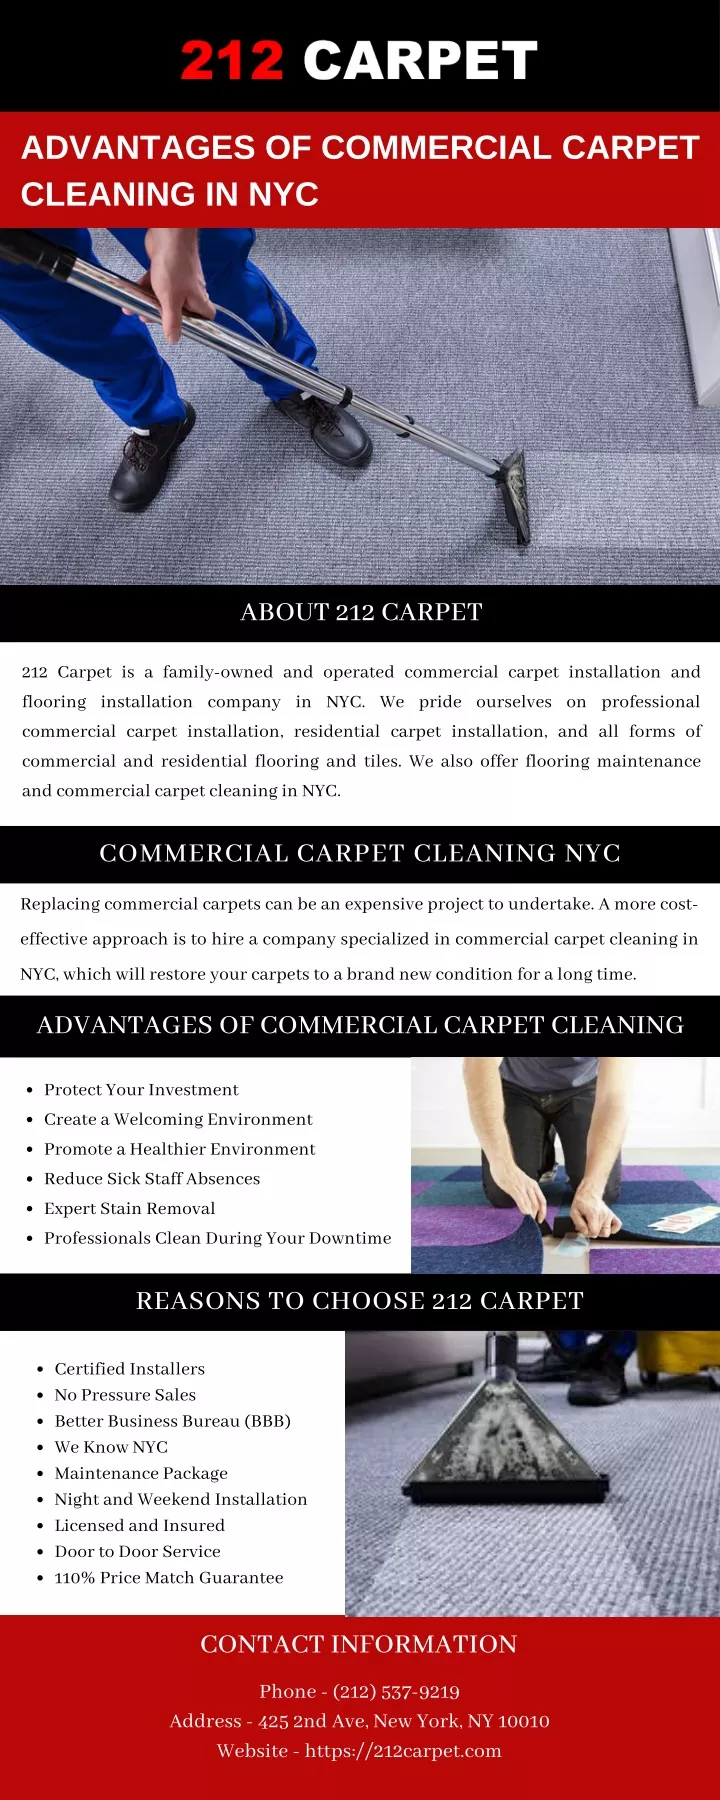 advantages of commercial carpet cleaning in nyc